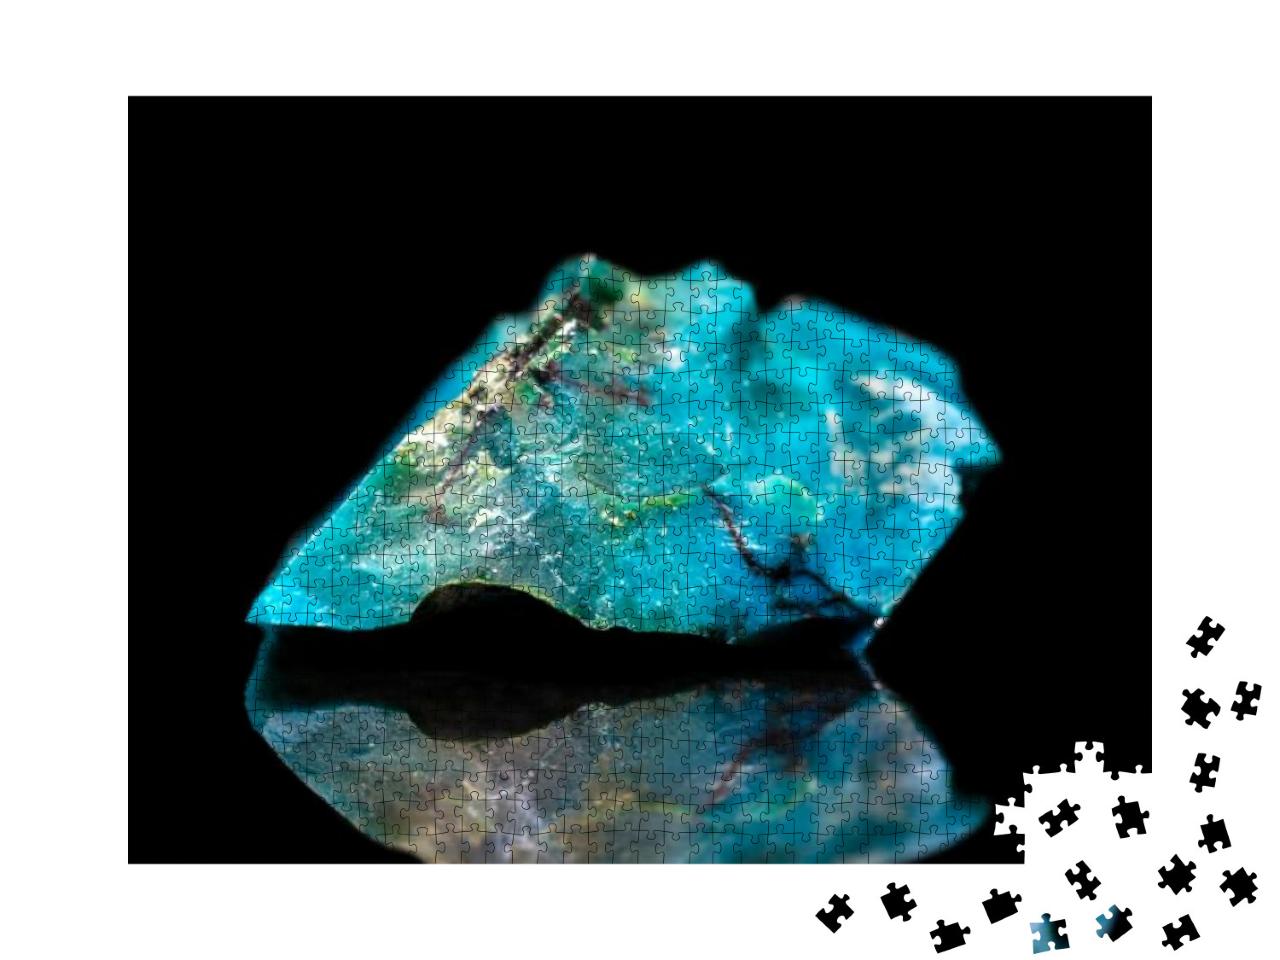 Raw Gemstone in Front of Black, Blue Chrysocolla Mineral... Jigsaw Puzzle with 1000 pieces